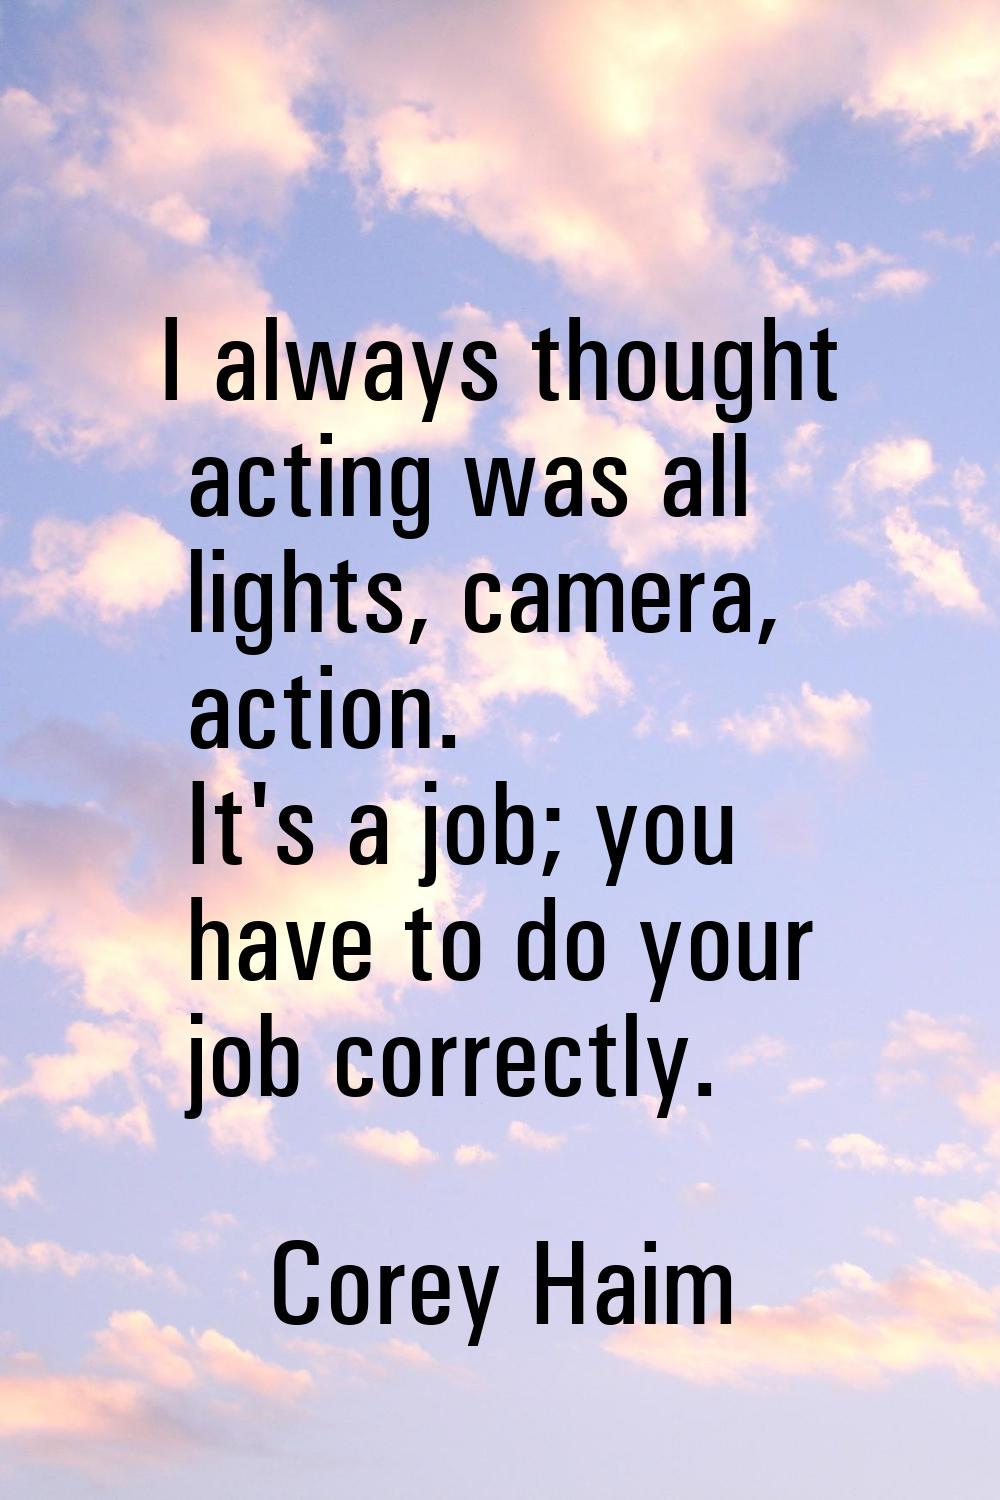 I always thought acting was all lights, camera, action. It's a job; you have to do your job correct